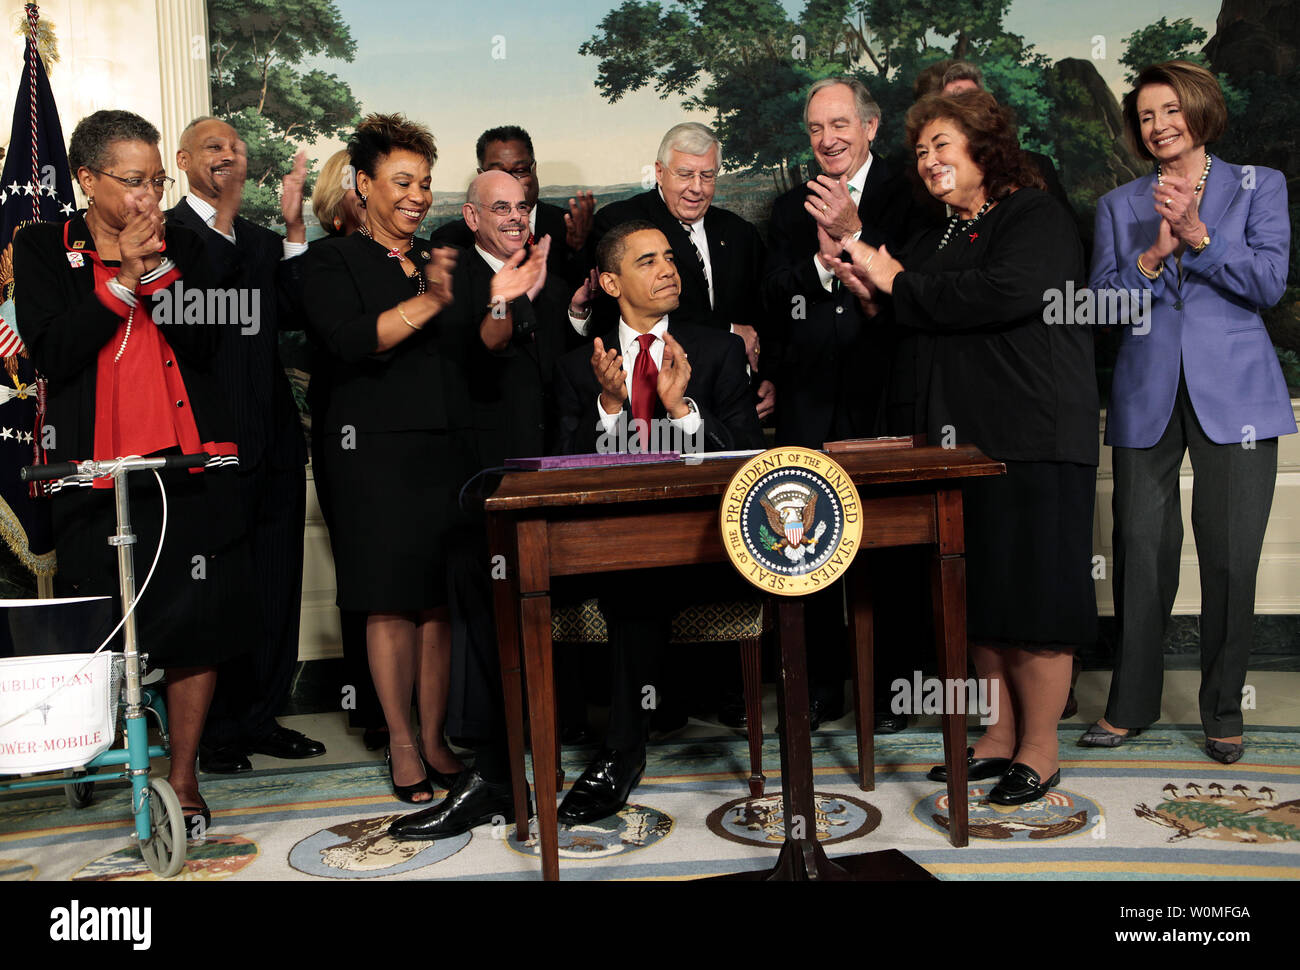 U.S. President Barack Obama, surrounded by members of Congress and Jeanne White-Ginder, mother of Ryan White (2nd R), signs the Ryan White HIV/AIDS treatment extension act of 2009 in the Diplomatic Room of the White House in Washington on October 30, 2009. The act is the largest federally funded program for people living with HIV/AIDS in the U.S. It was named in honor of Ryan White, a  teenager who contracted AIDS through a tainted hemophilia treatment in 1984 and became a well-known advocate for AIDS research and awareness, until his death on April 8, 1990. Stock Photo